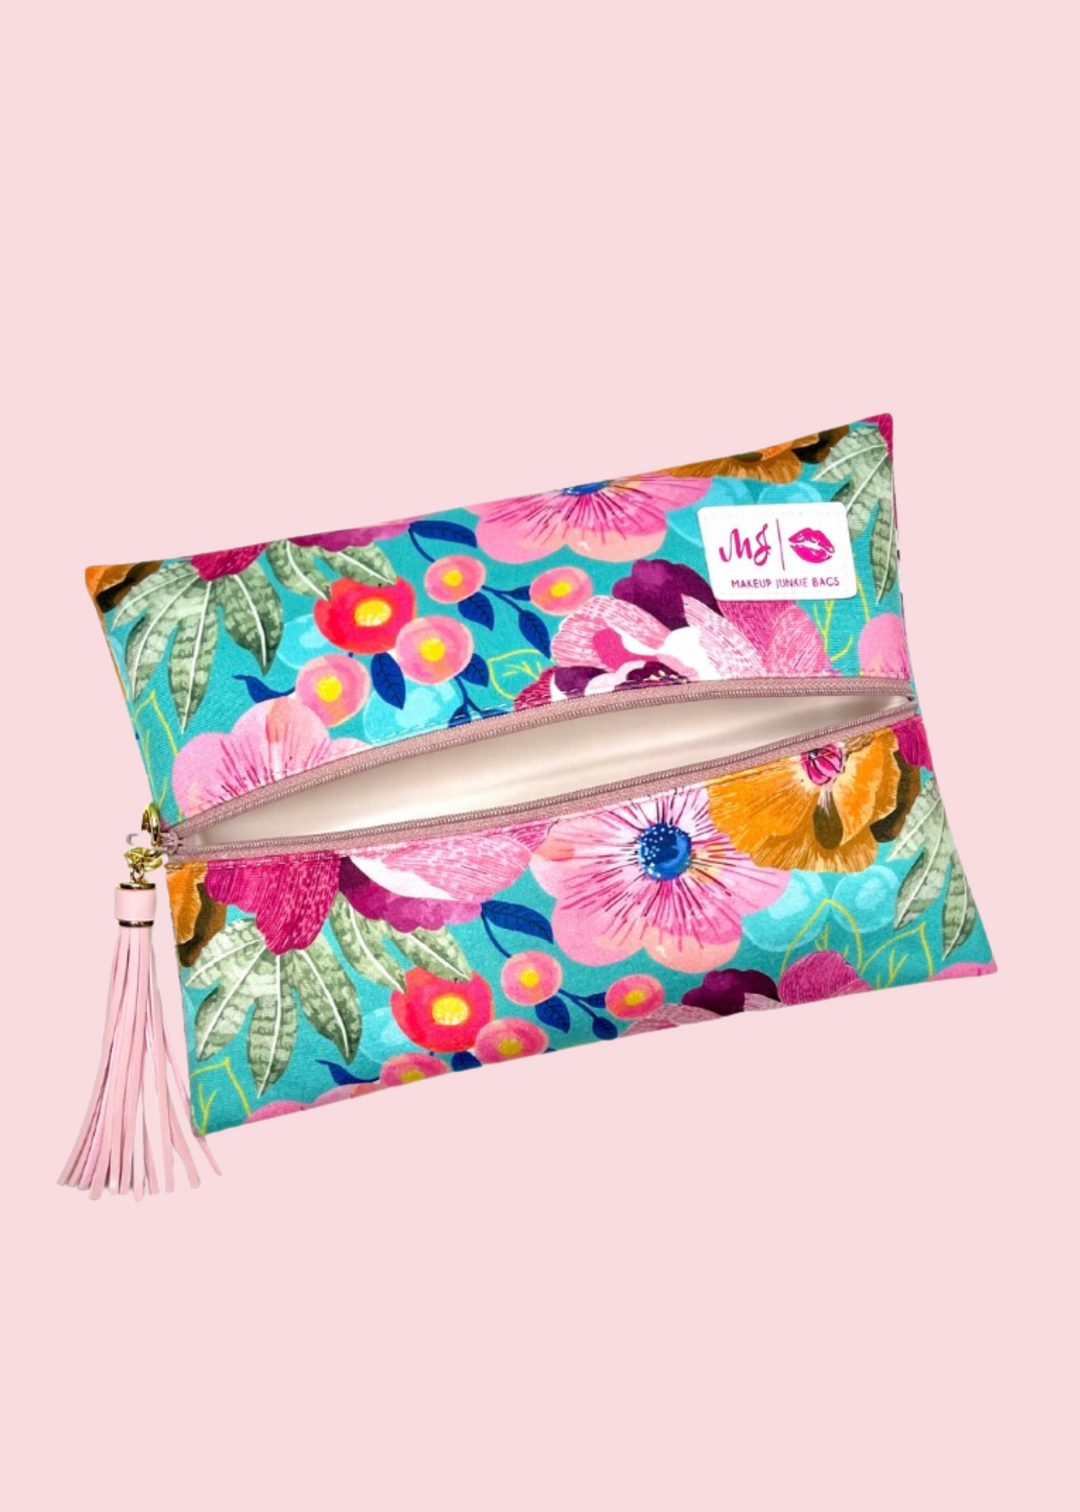 Makeup Junkie Bags - Whimsy Flat Lay [Pre-Order]